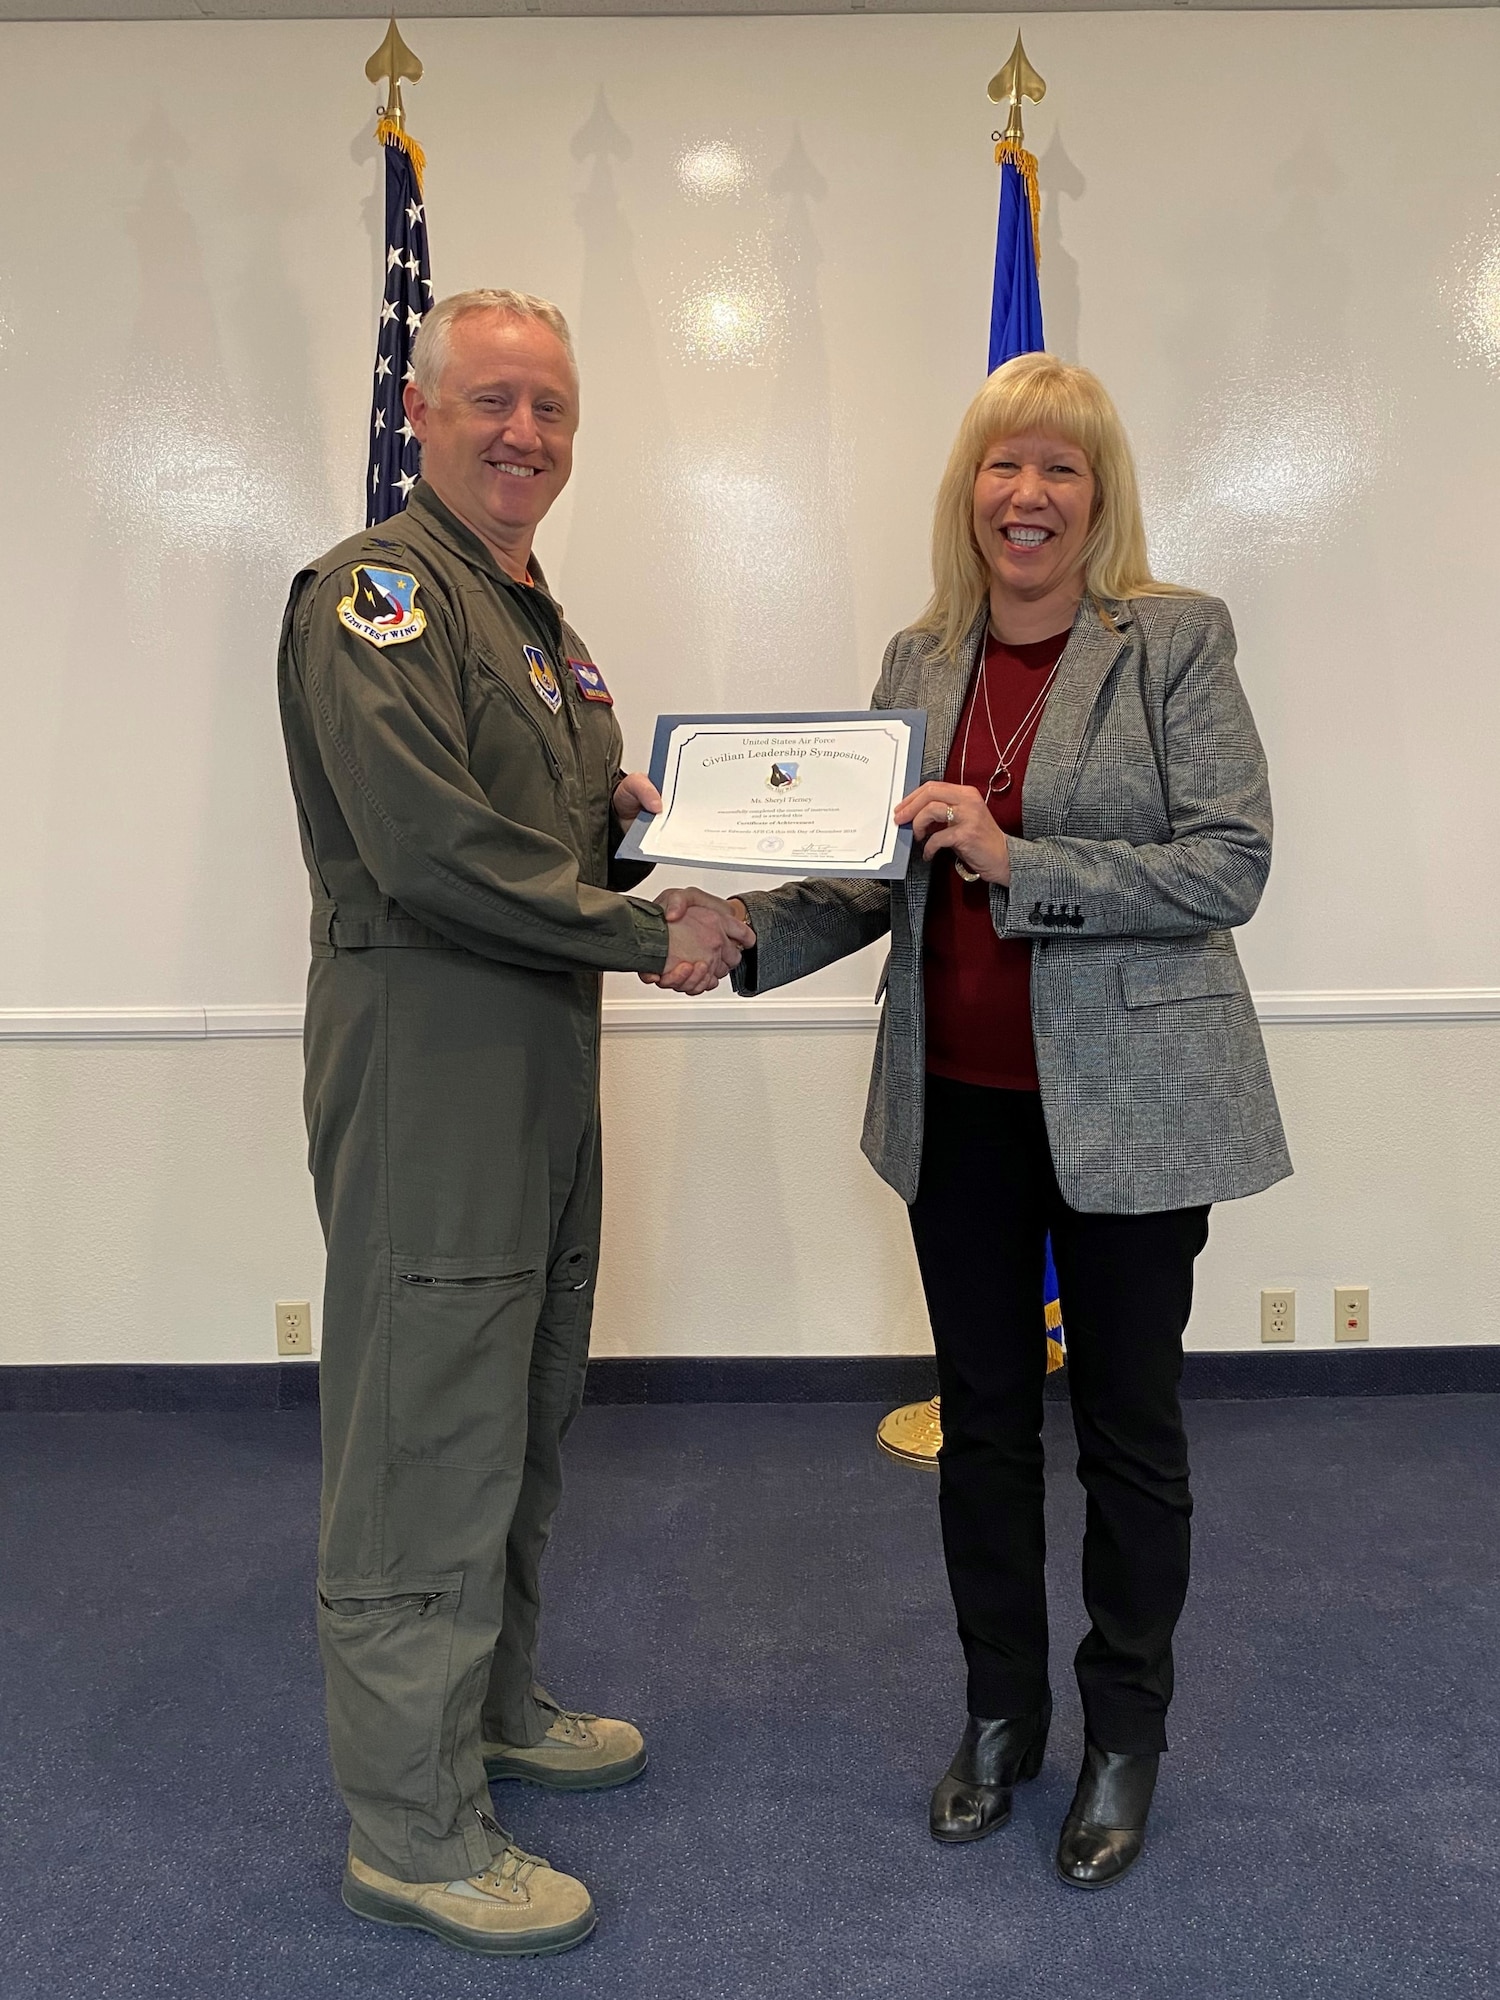 Sheryl Tierney, Engineering Development Office Chief, and Col. Kirk Reagan, 412th Test Wing Vice Commander, pose for a photo during her graduation ceremony from the first ever Civilian Leadership School at Edwards Air Force Base, California. (Courtesy photo)